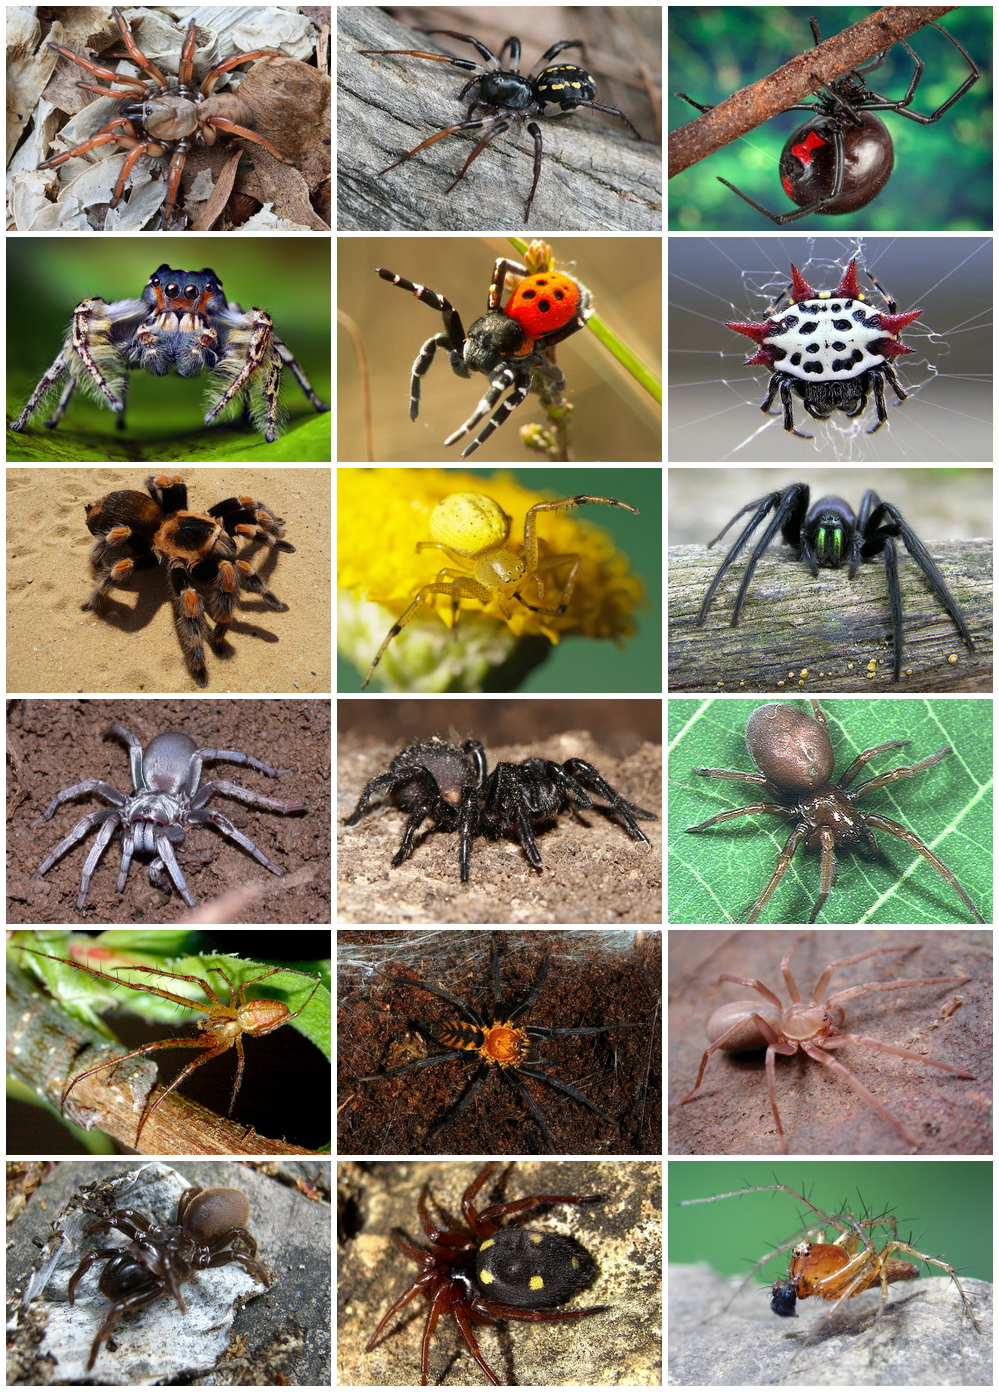 What Are Spiders?